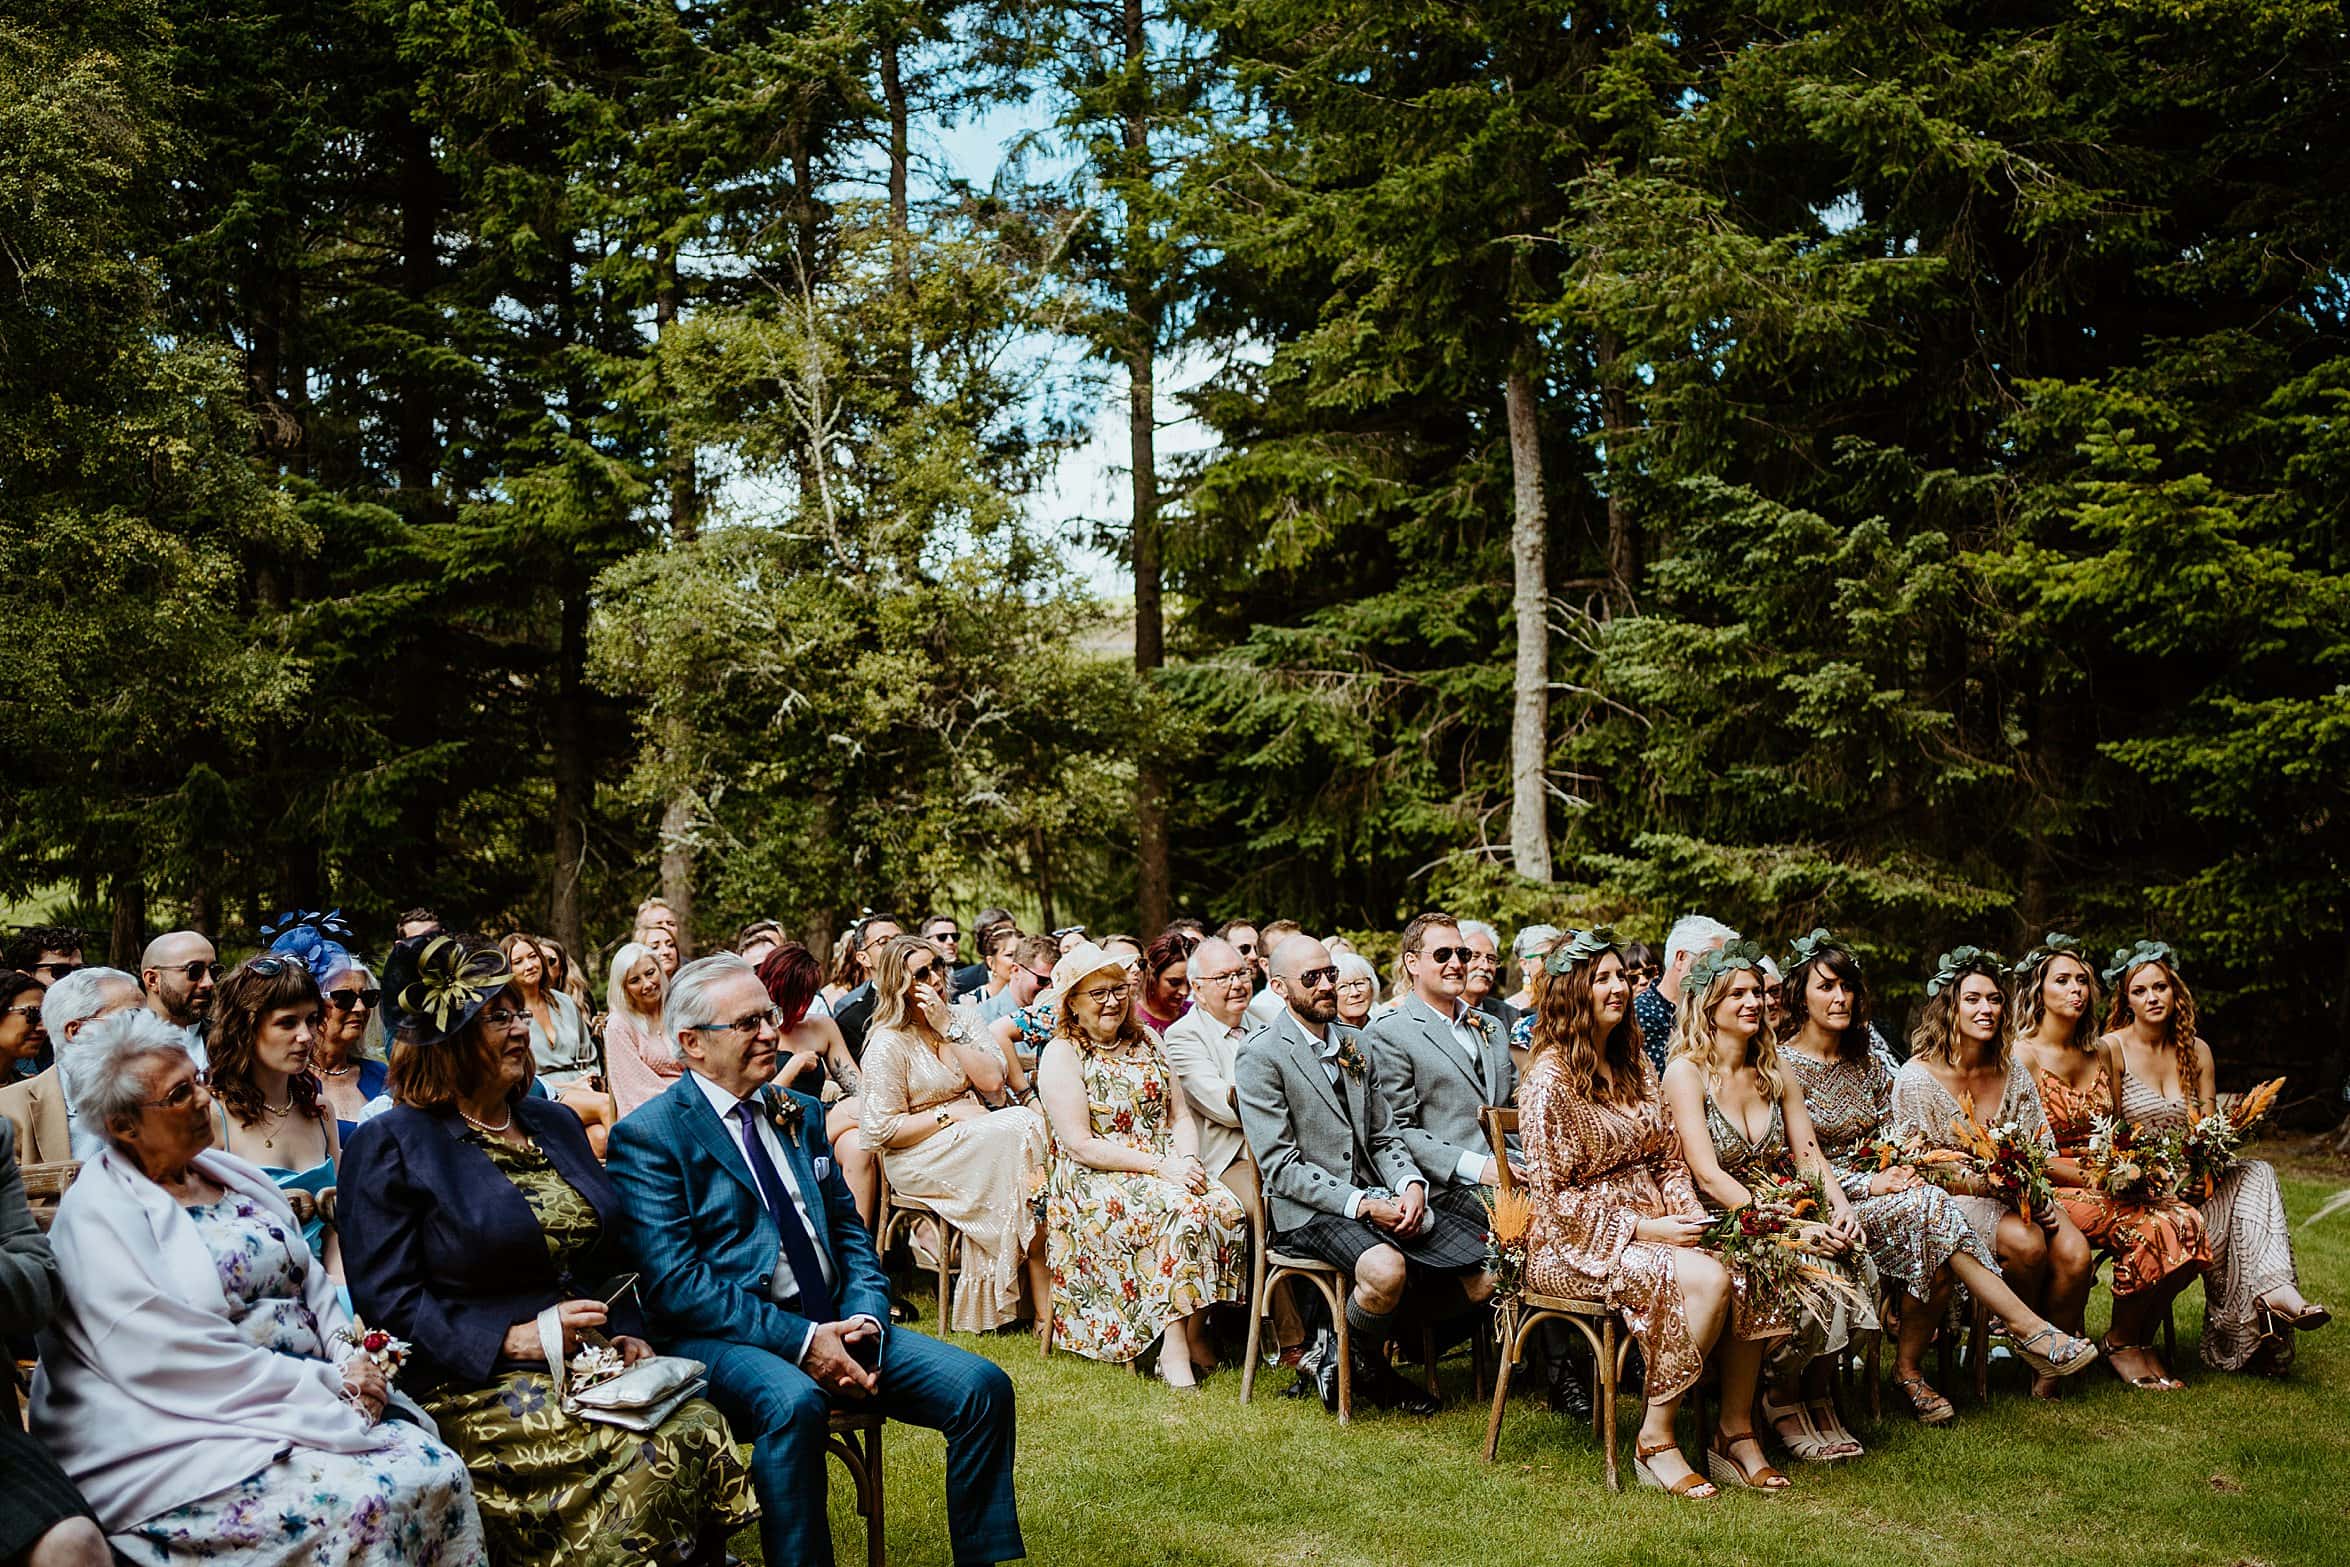 view of guests at outdoor ceremony sitting on wooden seats on grass lawn with woodland in background cardney steading exclusive use wedding venue